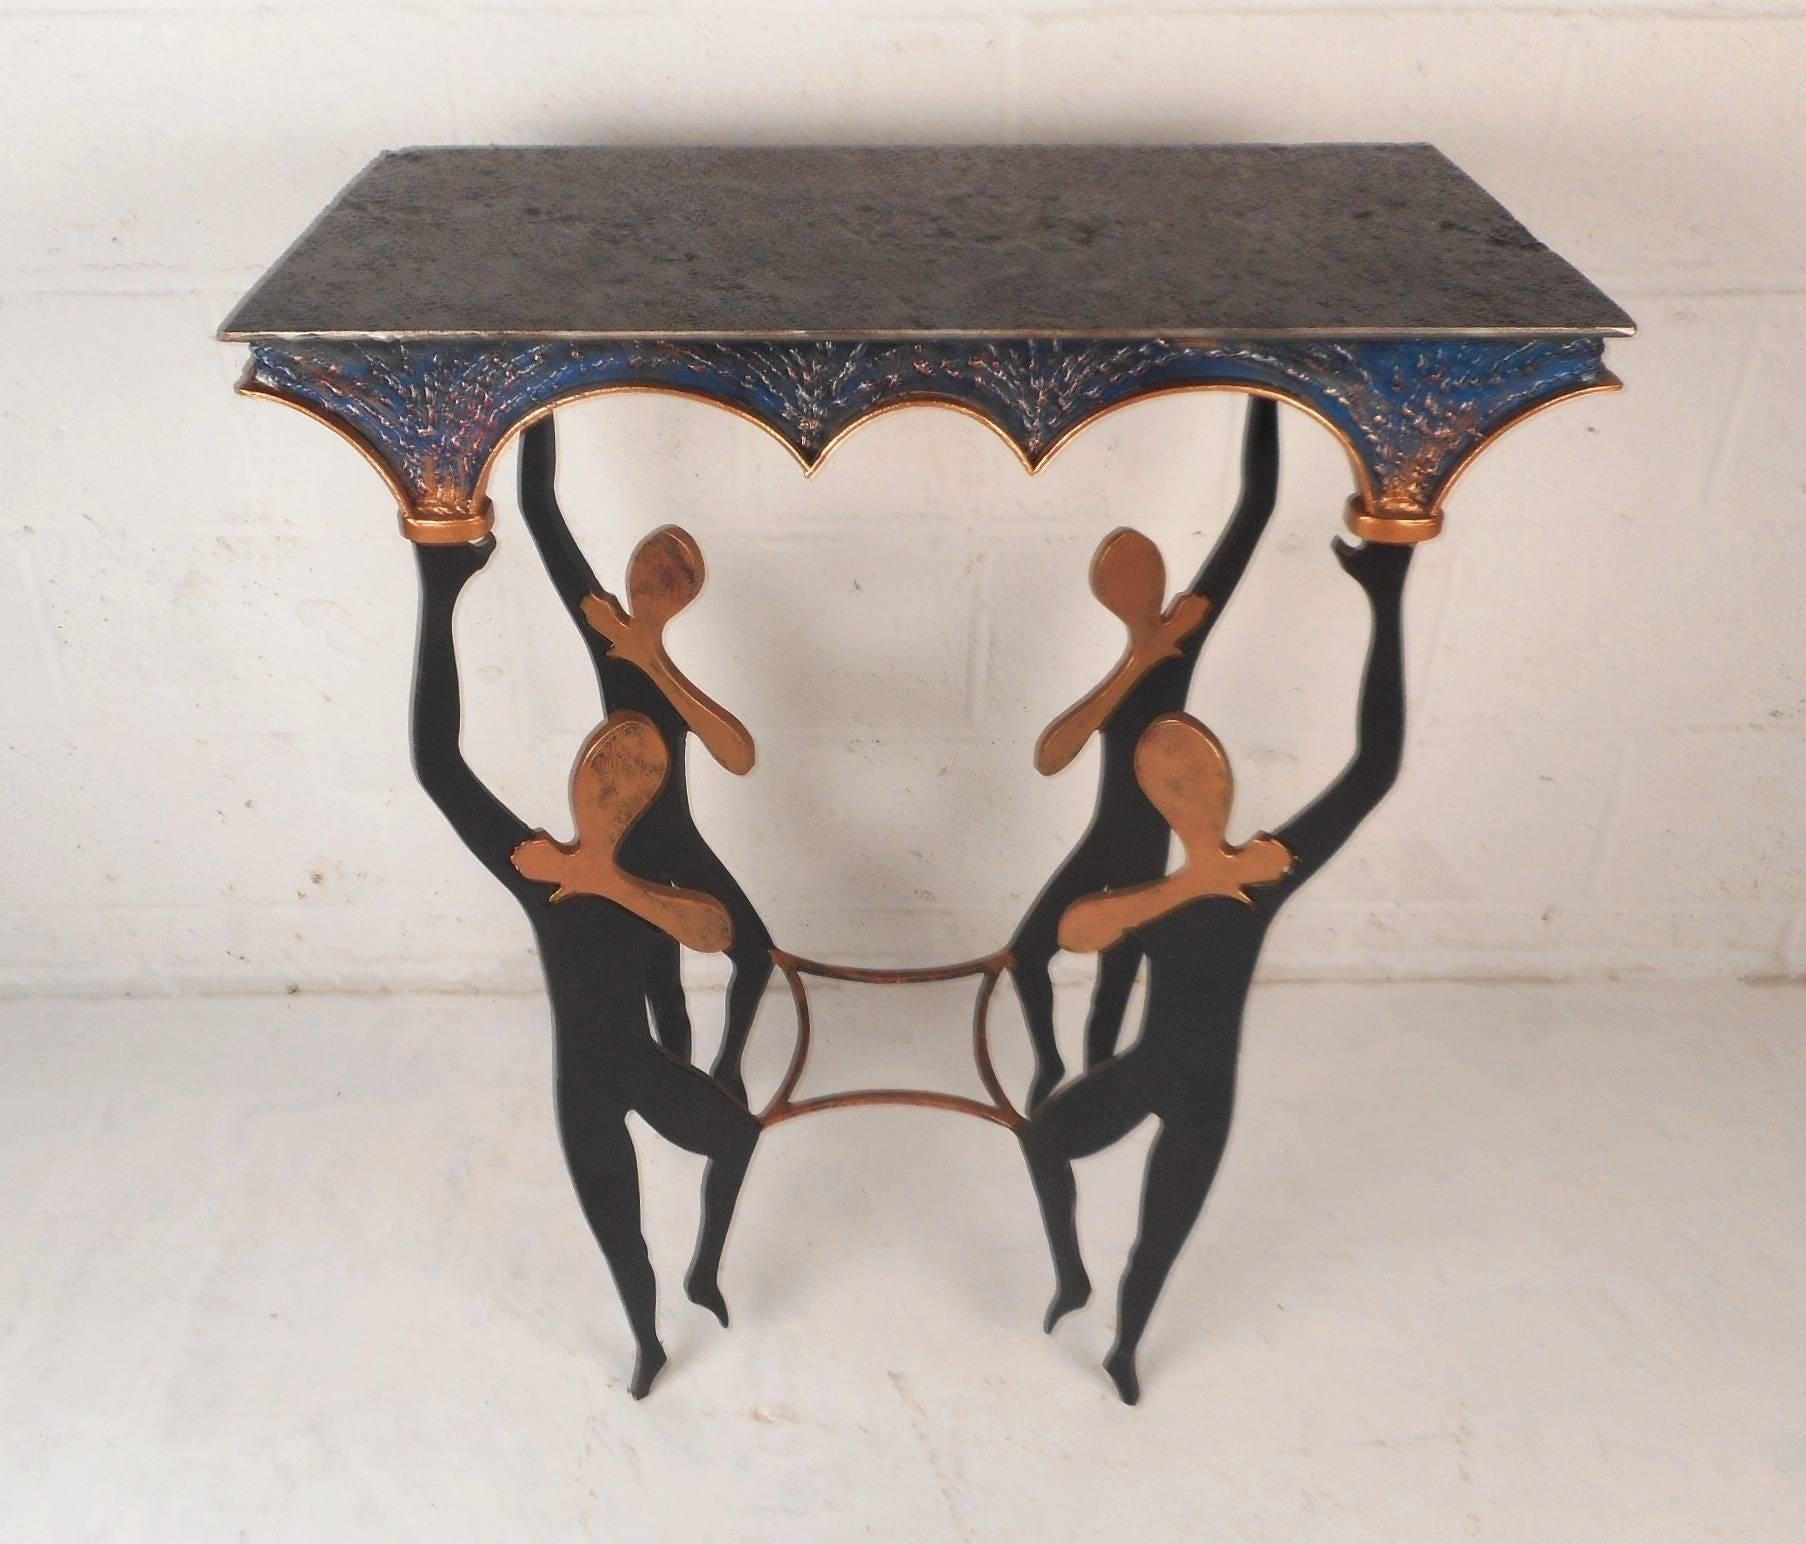 This stunning Mid-Century Modern table features an extremely heavy frame with unique ballerina designs functioning as the legs. This exquisite piece has various colors within the metal and sculpted detail throughout. This is a versatile piece that